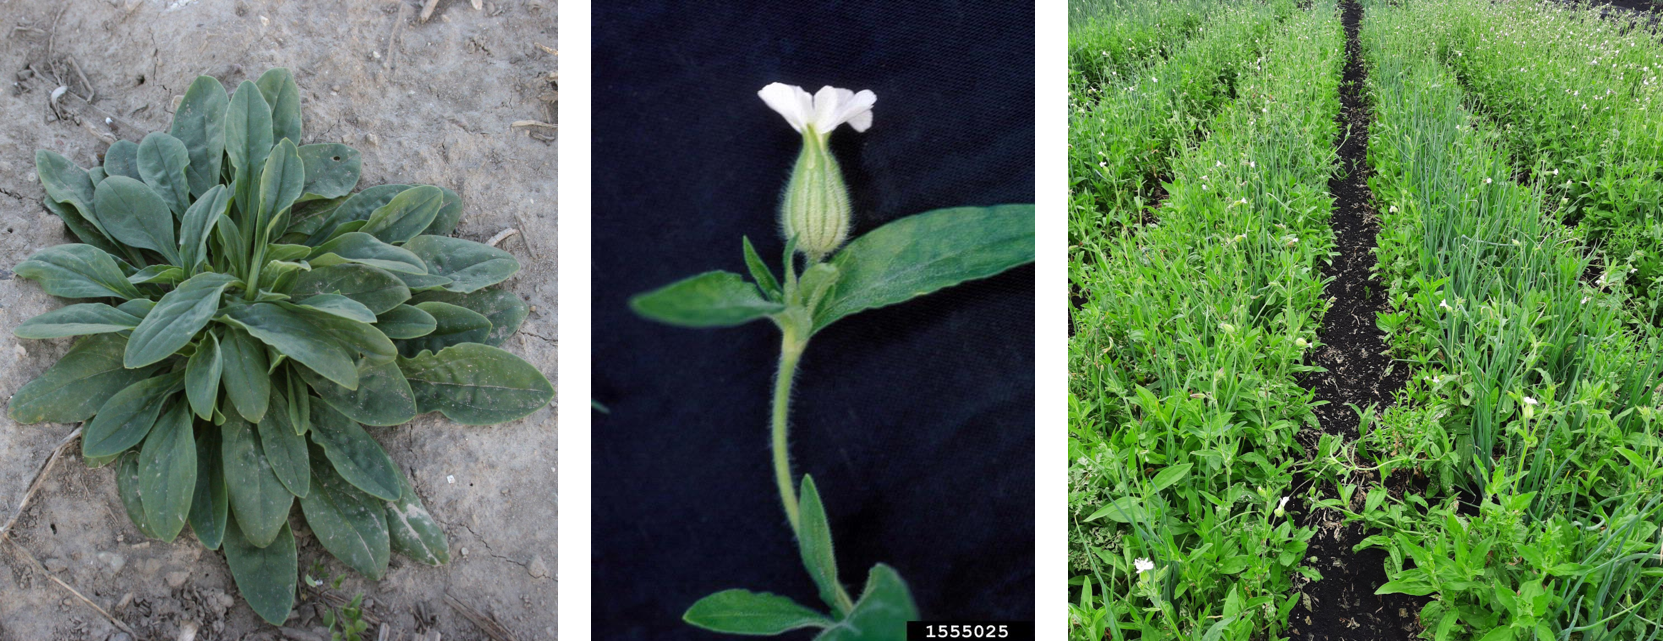 White campion rosette (left), flower with inflated calyx (middle) and severe infestation in onion field (right). Photos by MSU Plant & Pest Diagnostics (left), Ohio State Weed Lab, Ohio State University, Bugwood.org (middle) and Chris Galbraith, MSU Extension (right).